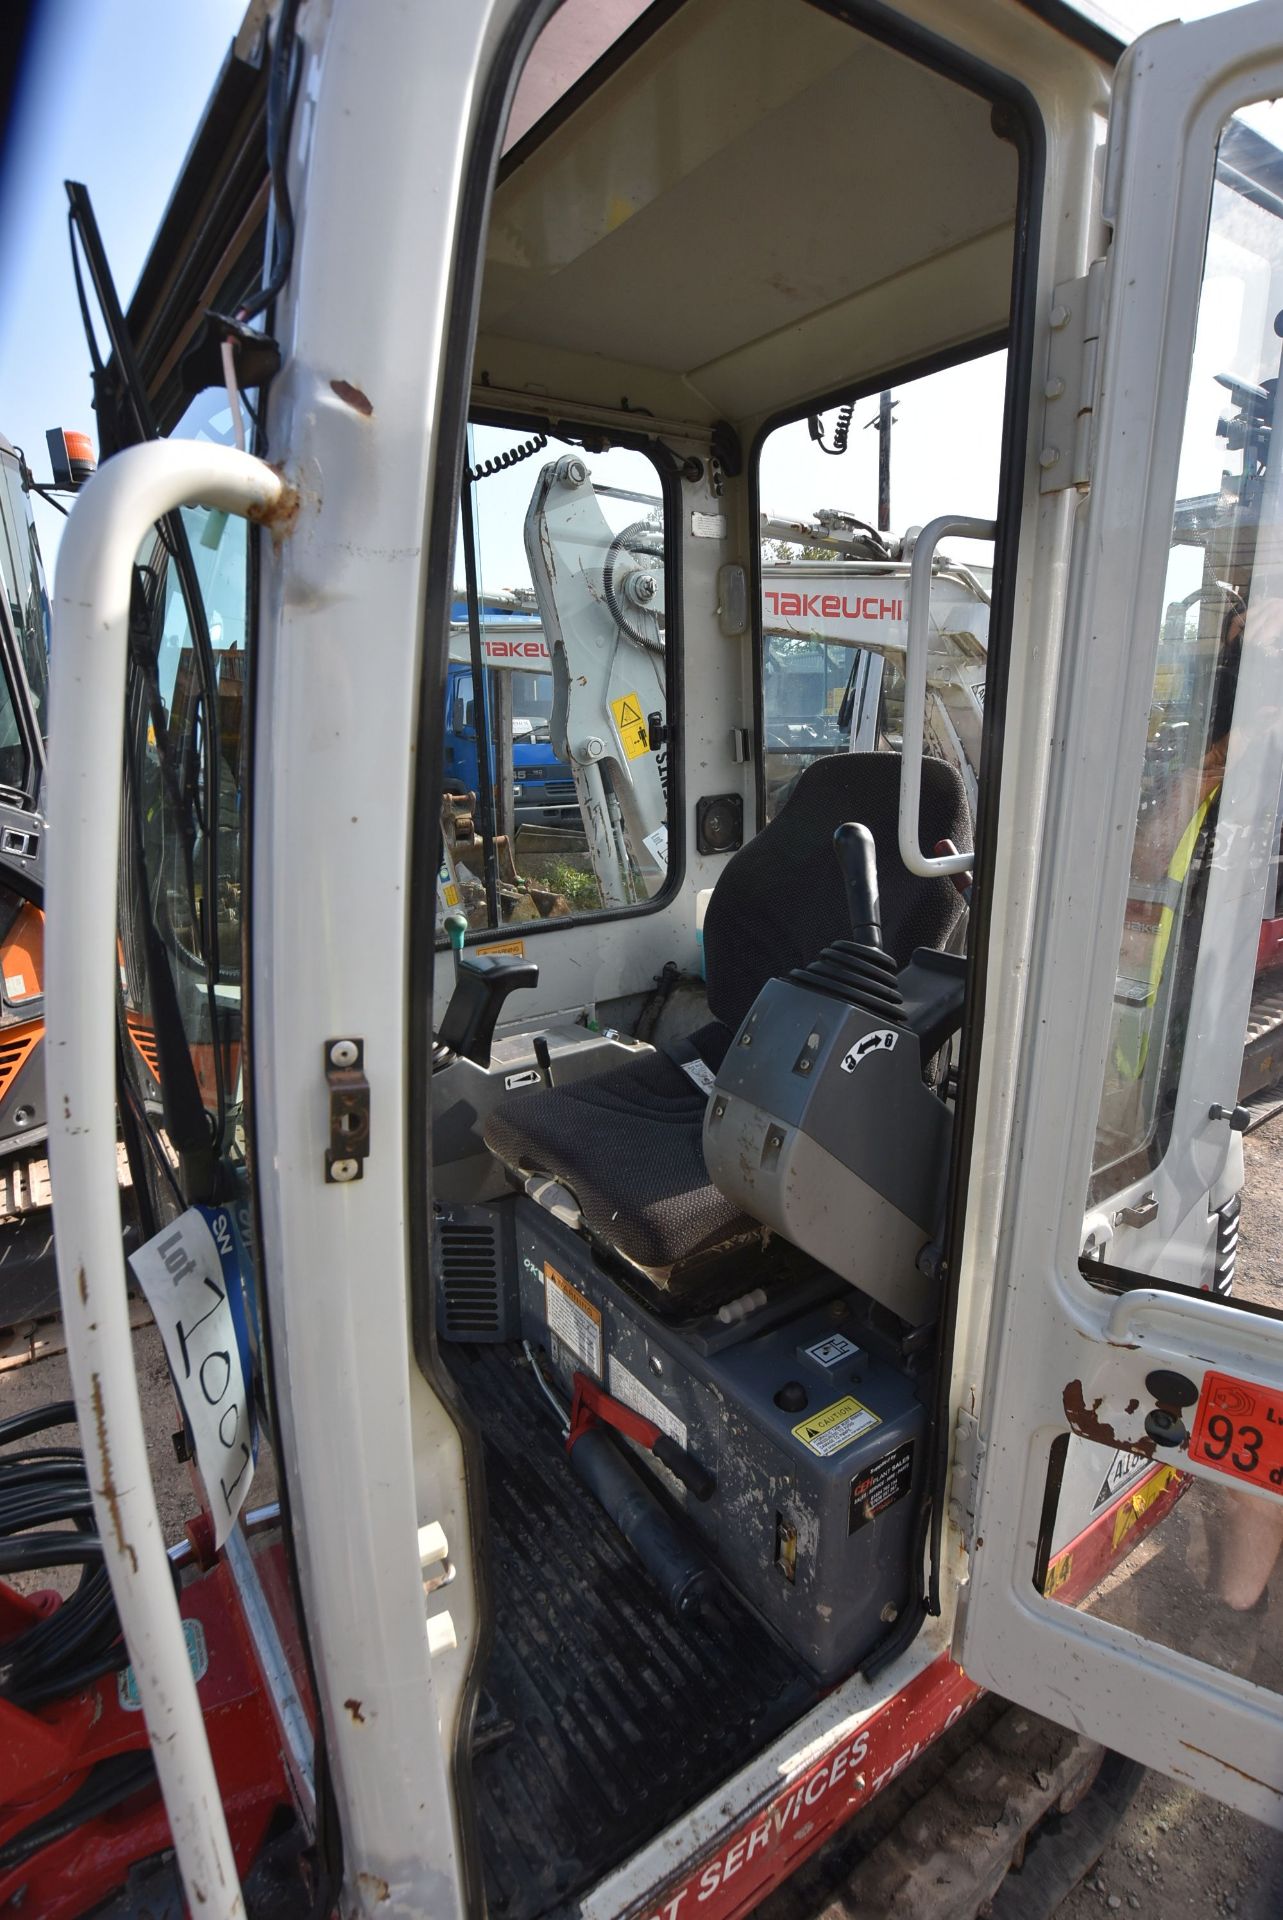 Takeuchi TB016 1.5T TRACKED EXCAVATOR, serial no. 116116442, year of manufacture 2014, indicated - Image 5 of 7